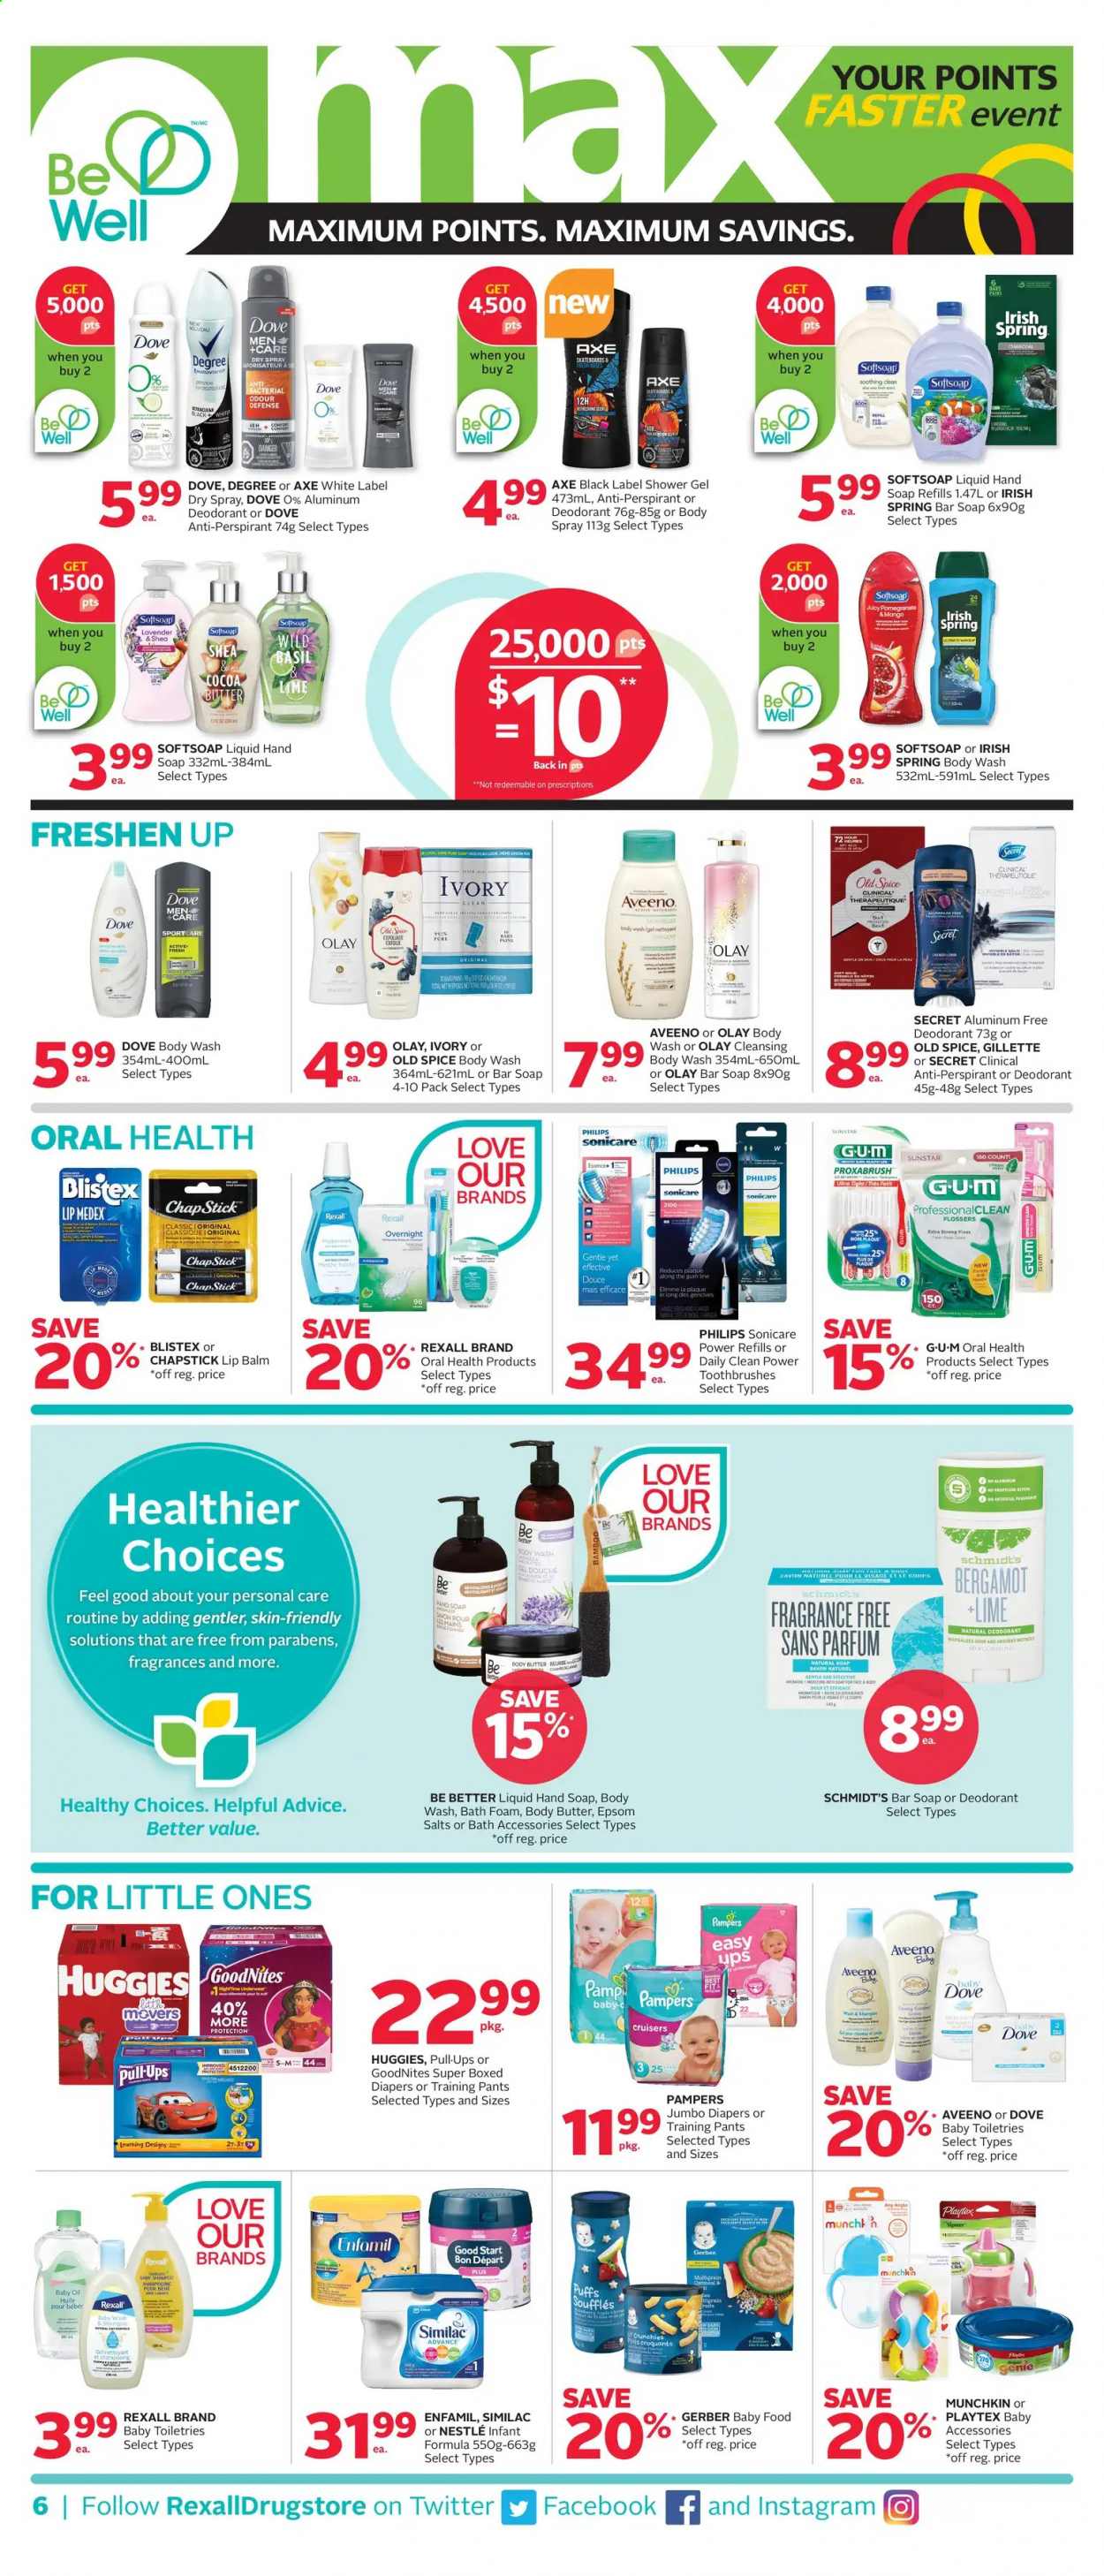 thumbnail - Circulaire Rexall - 26 Février 2021 - 04 Mars 2021 - Produits soldés - Nestlé, Axe, déodorant, shampooing, Dove, Gillette, Huggies, Old Spice, Pampers, Sonicare. Page 6.